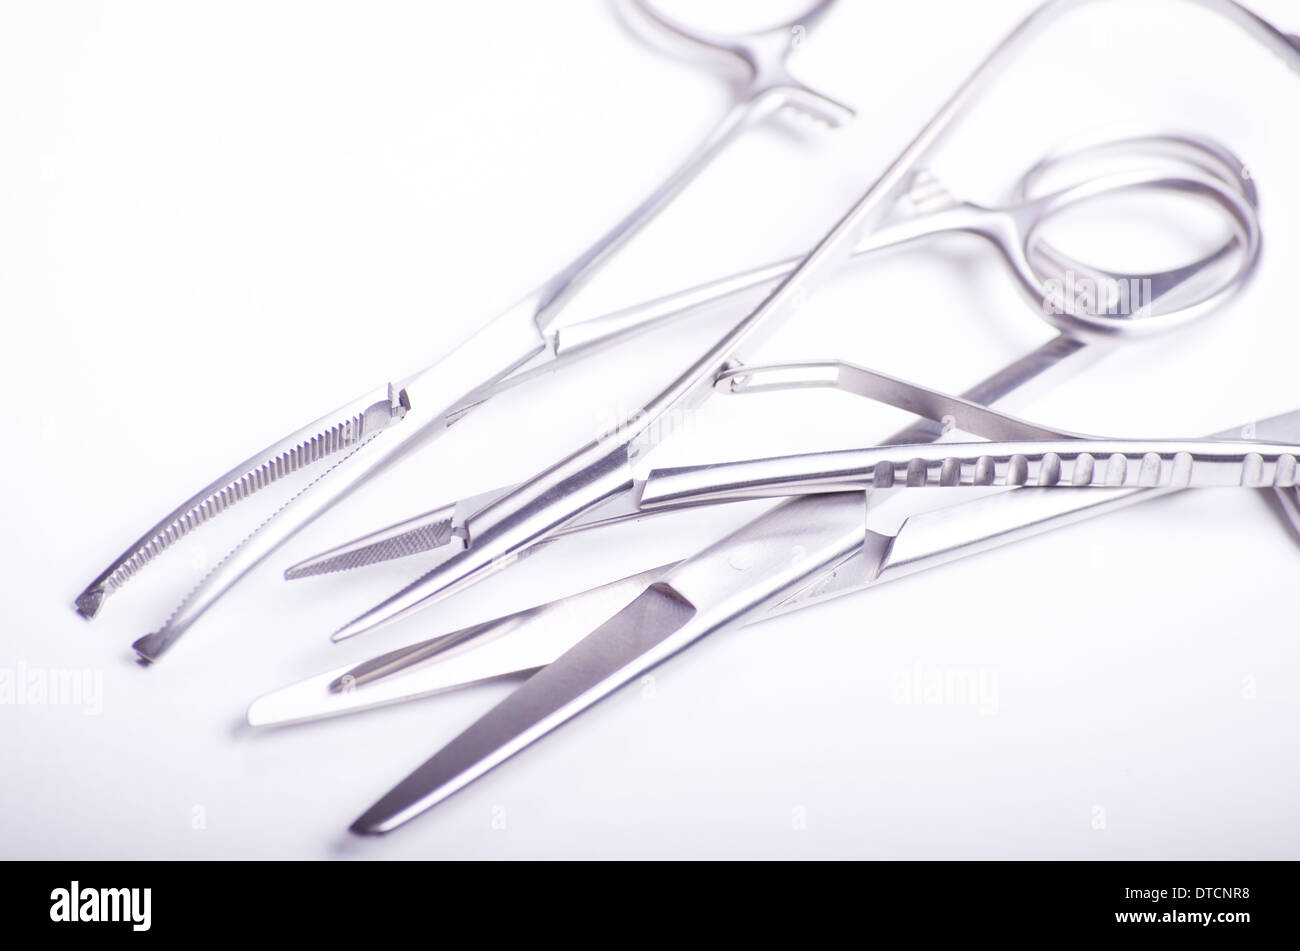 metallic surgical tools for general use on white background Stock Photo